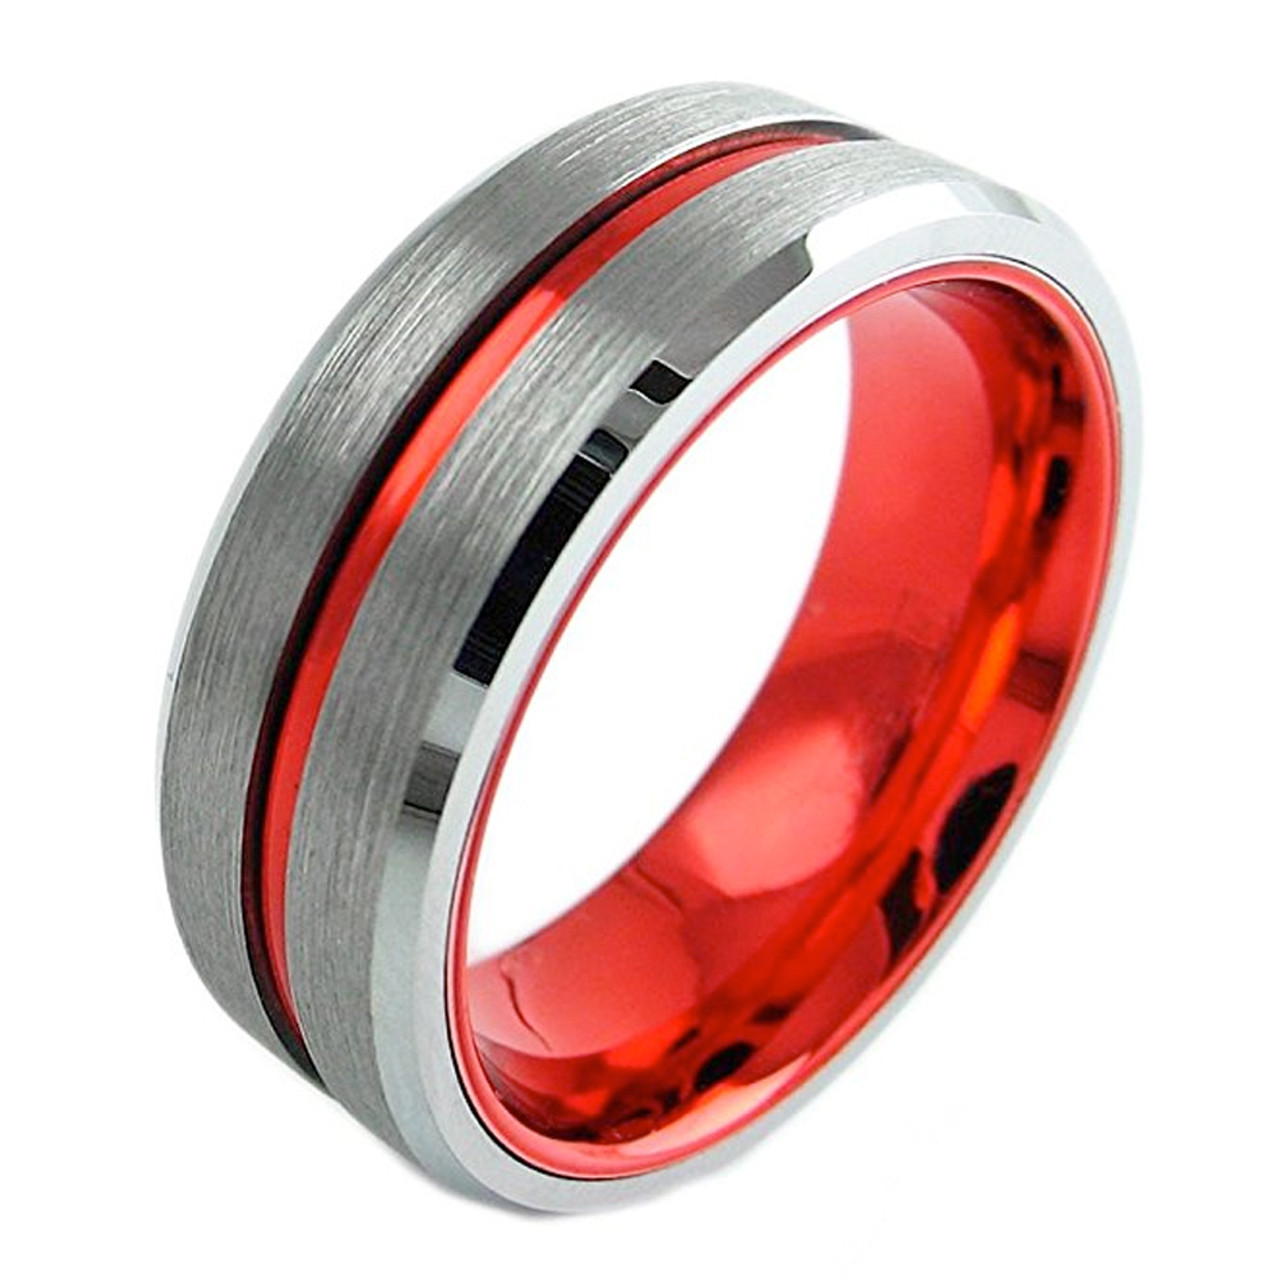 Men's Tungsten Wedding Band (8mm). Silver Matte Finish with Double Red Tone Tungsten Carbide Ring. Beveled Edge